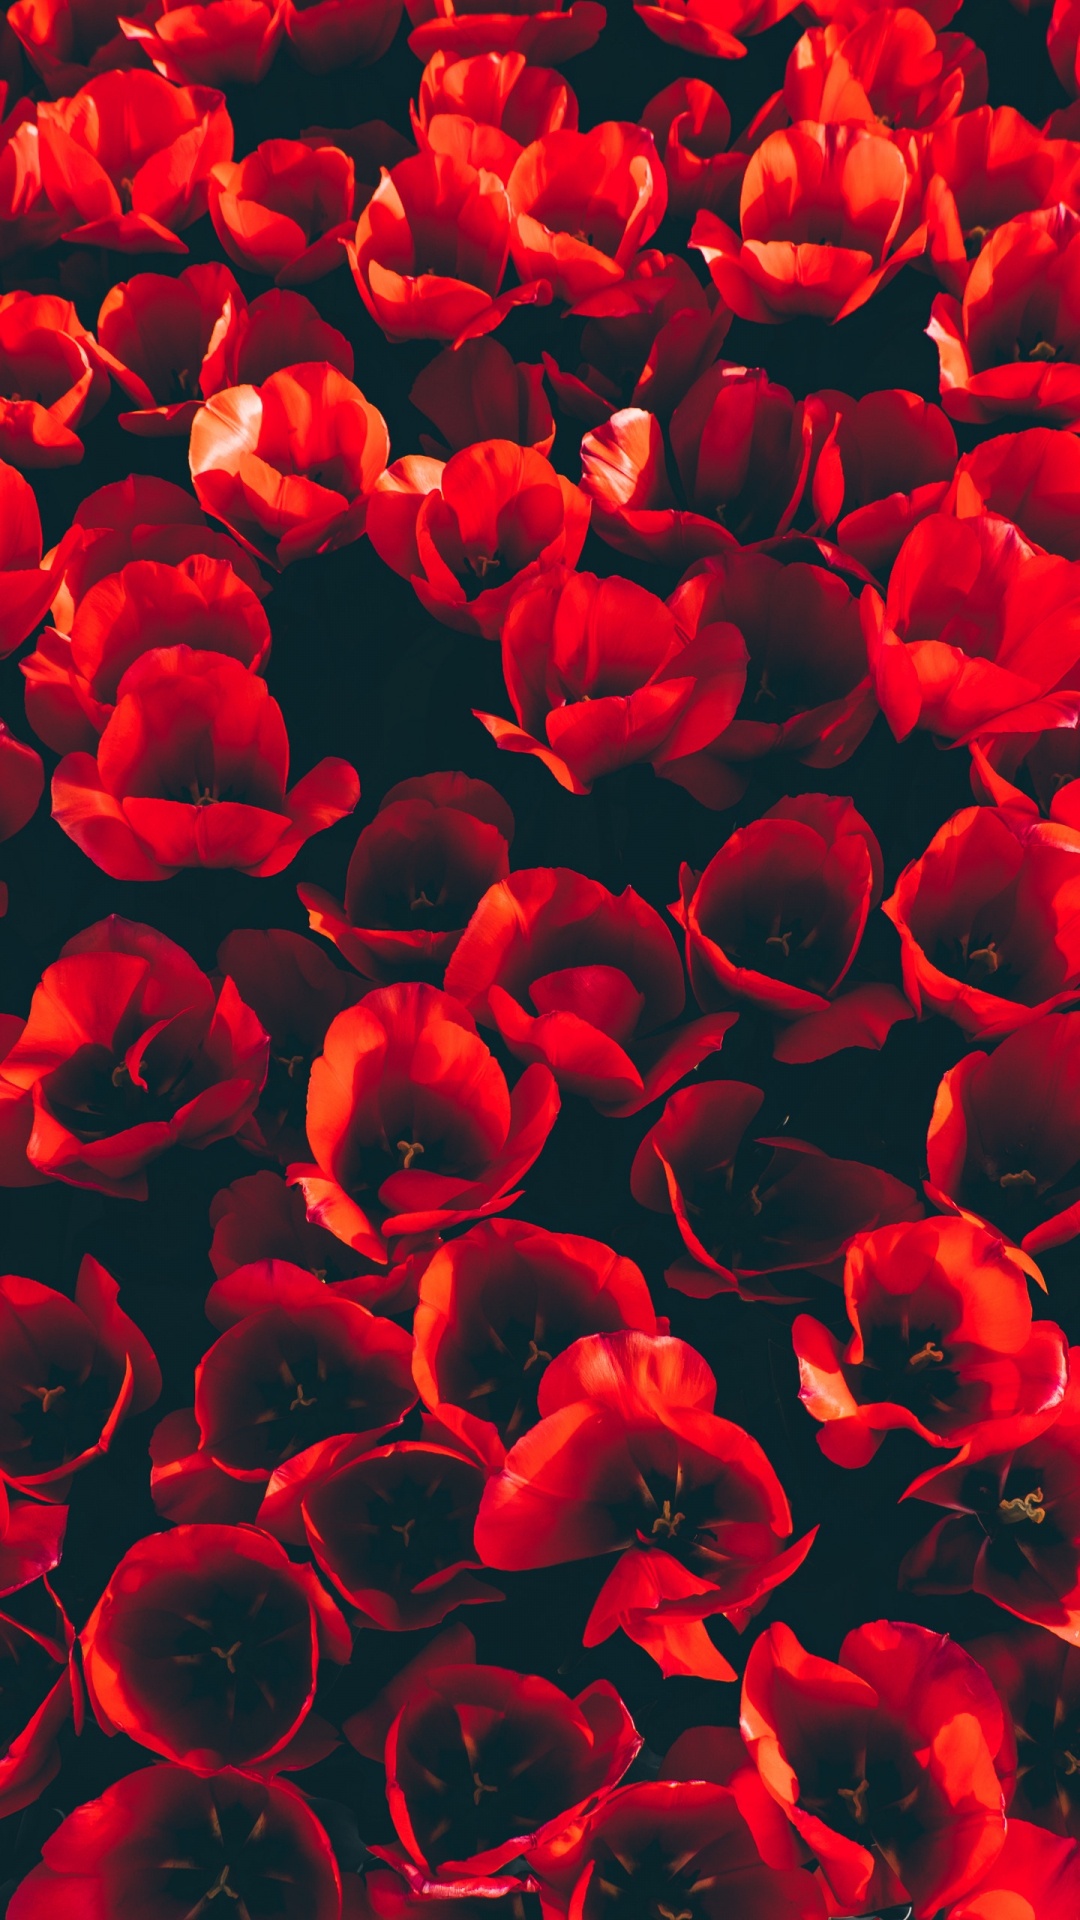 Red Flower Petals in Close up Photography. Wallpaper in 1080x1920 Resolution